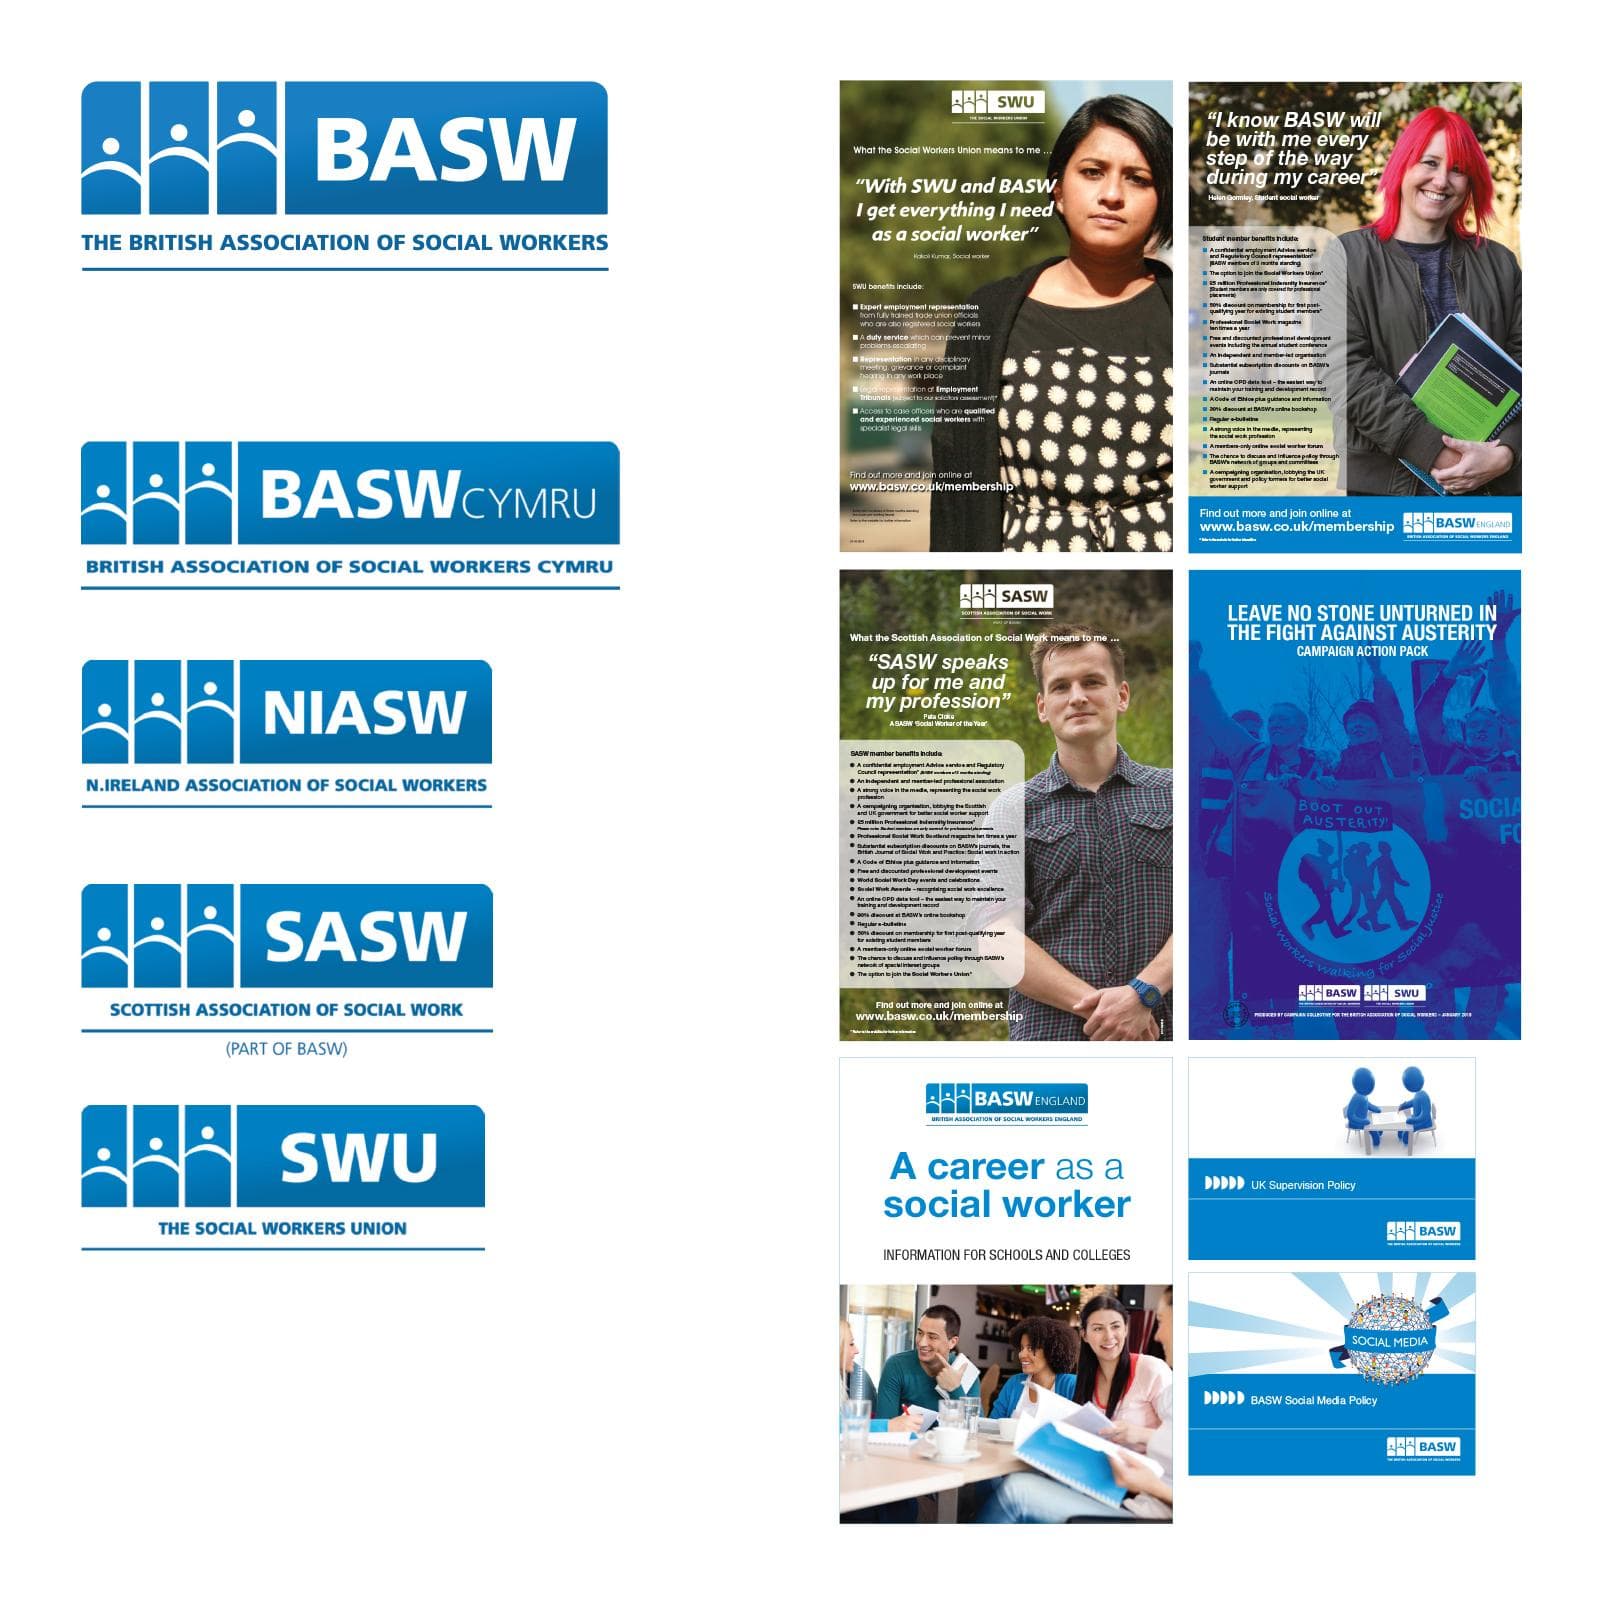 An image showing BASWs old visual identity